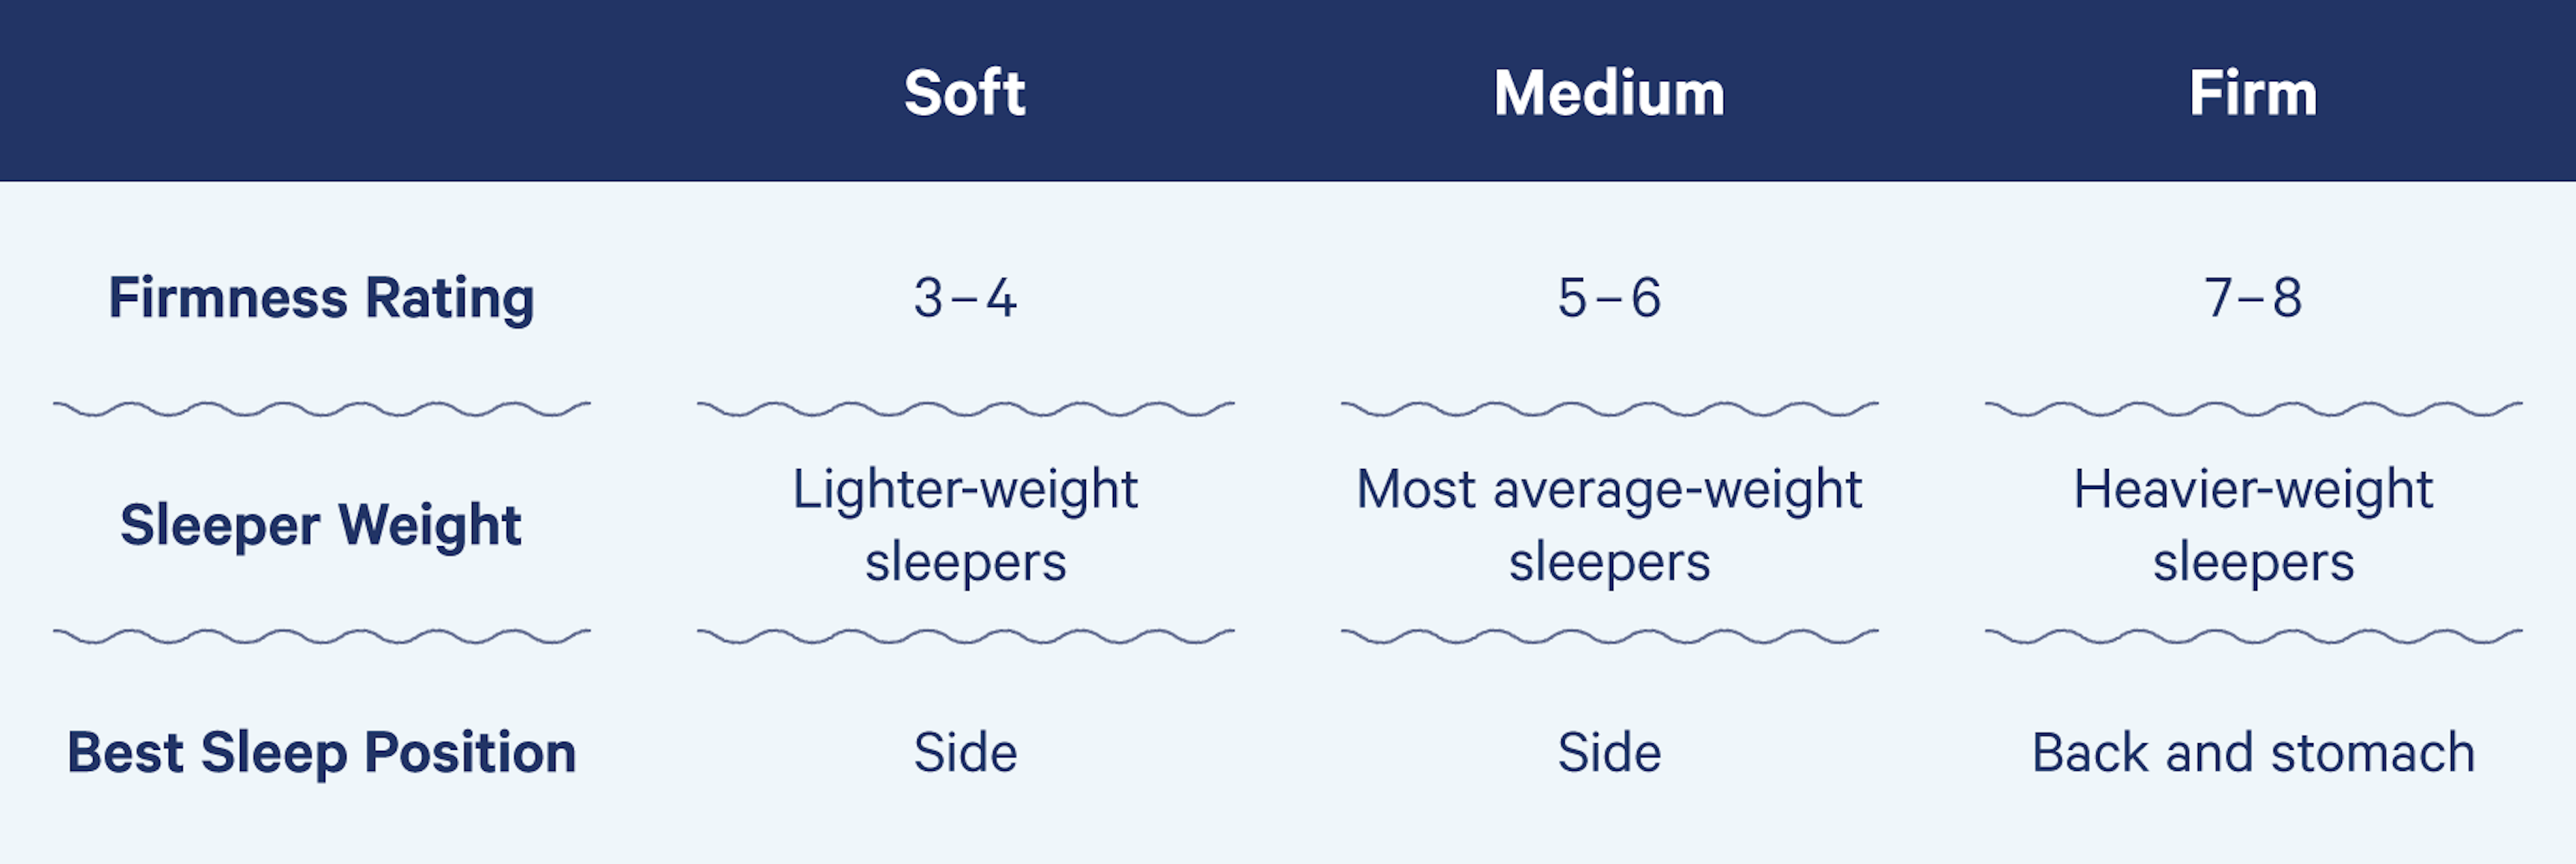 mattress firm delivery rating